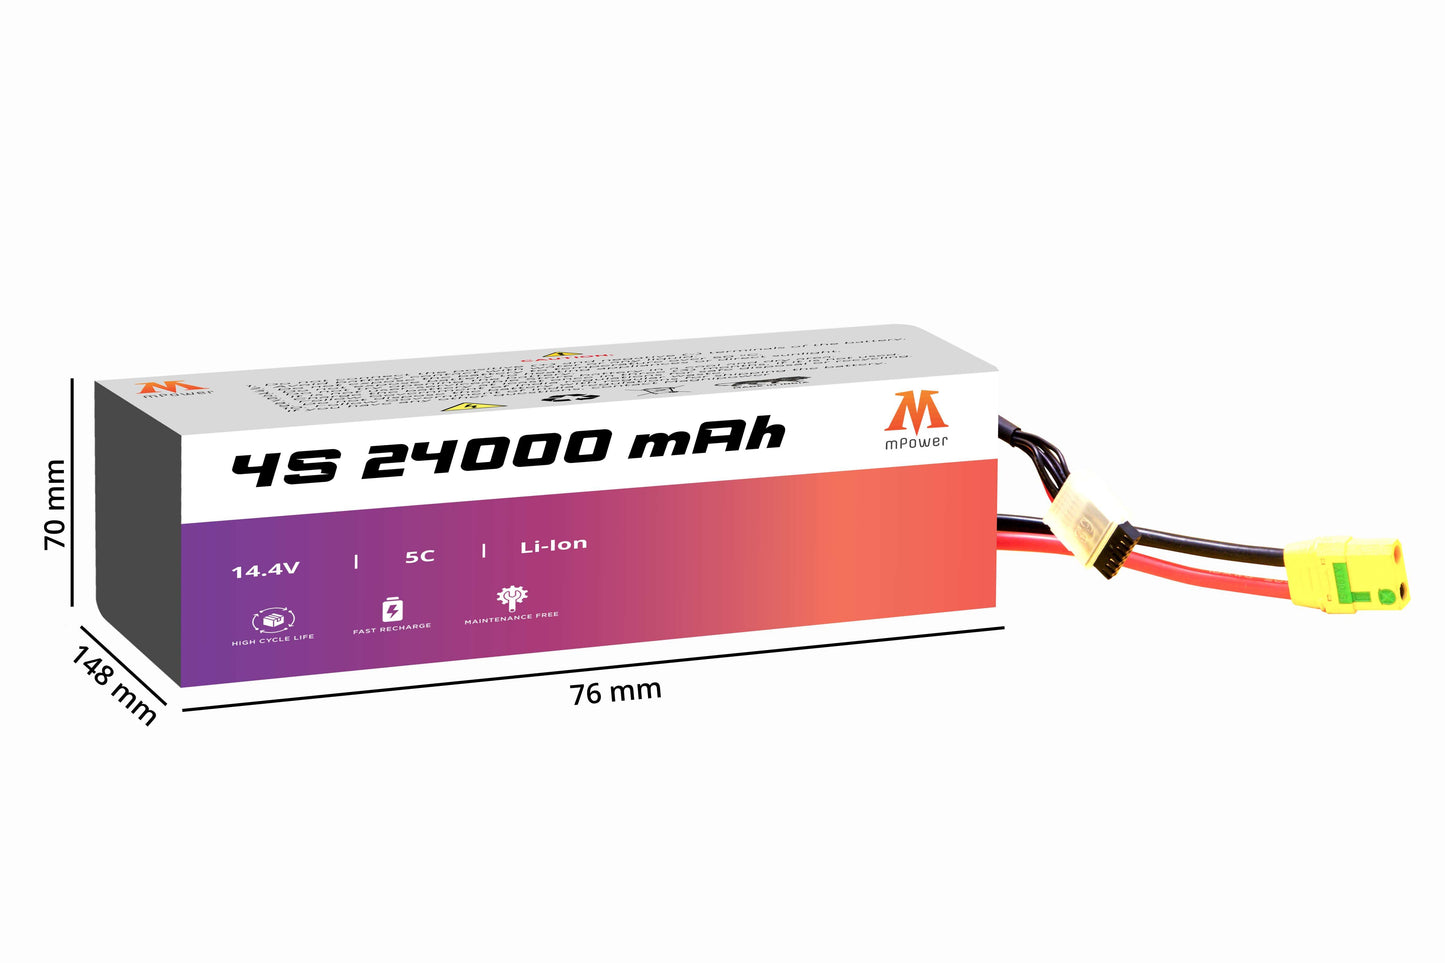 mPower 4S 24000mAh Lithium-Ion Battery for Survey Drones